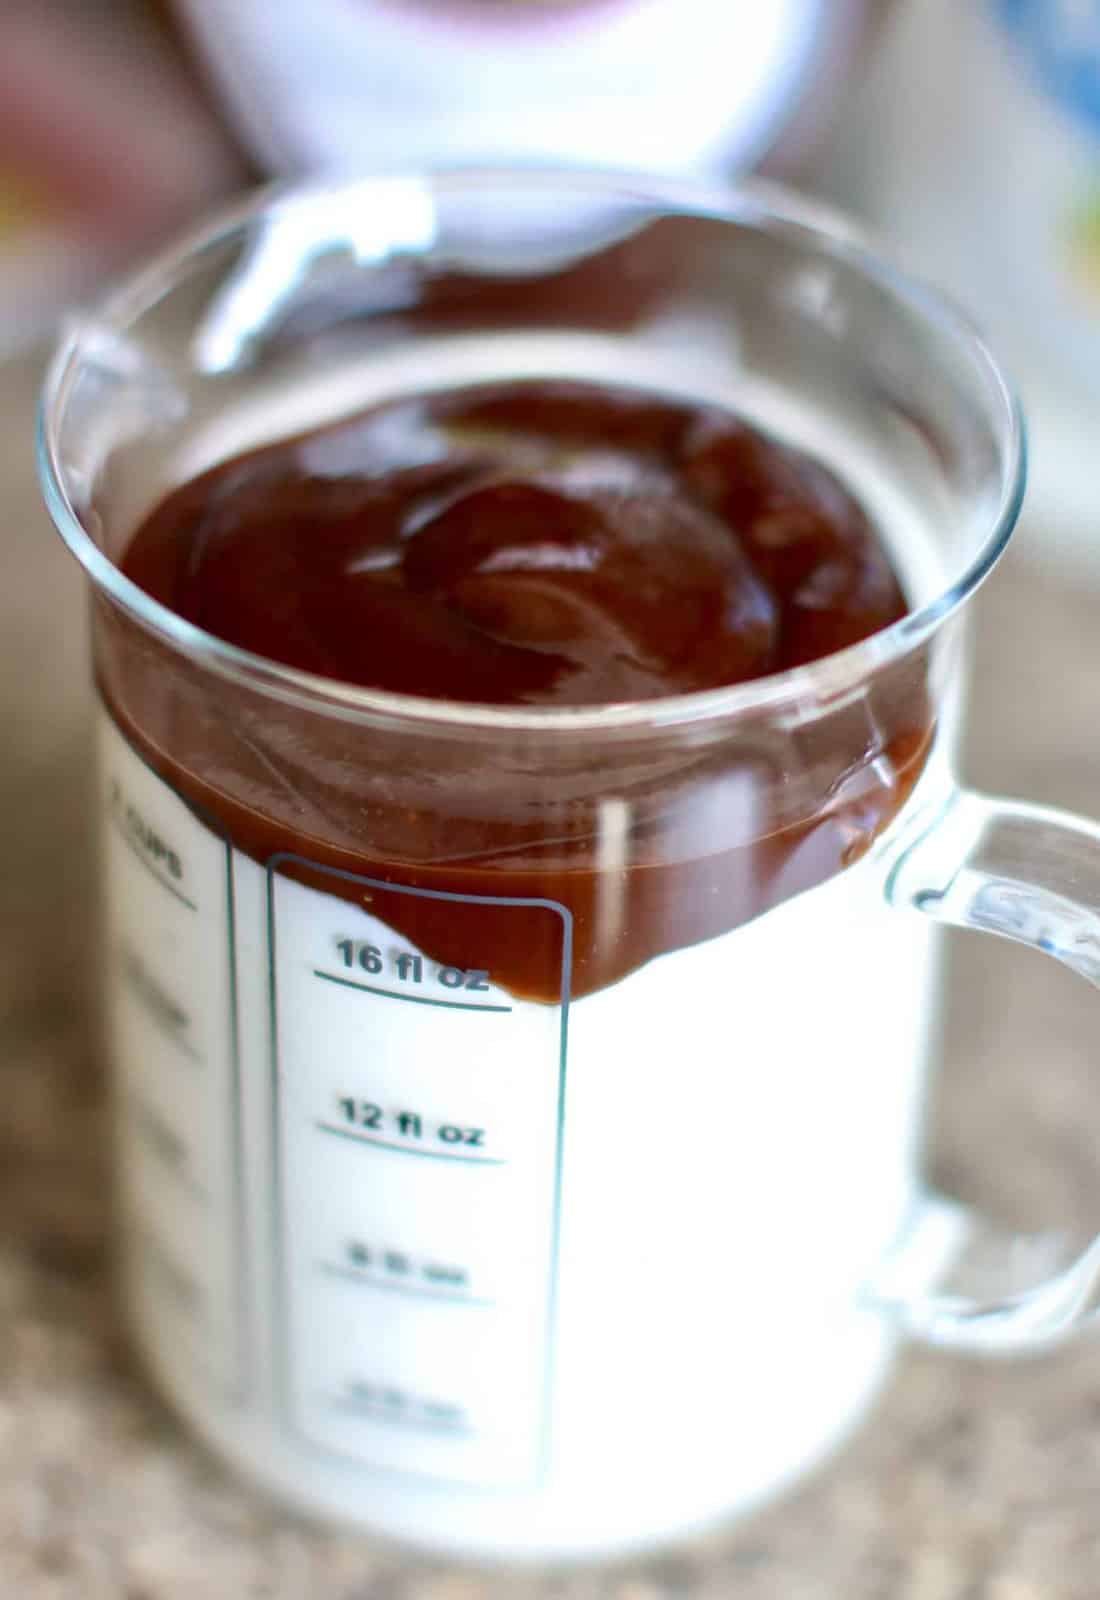 ranch dressing and barbecues sauce shown in a measuring cup beaker.